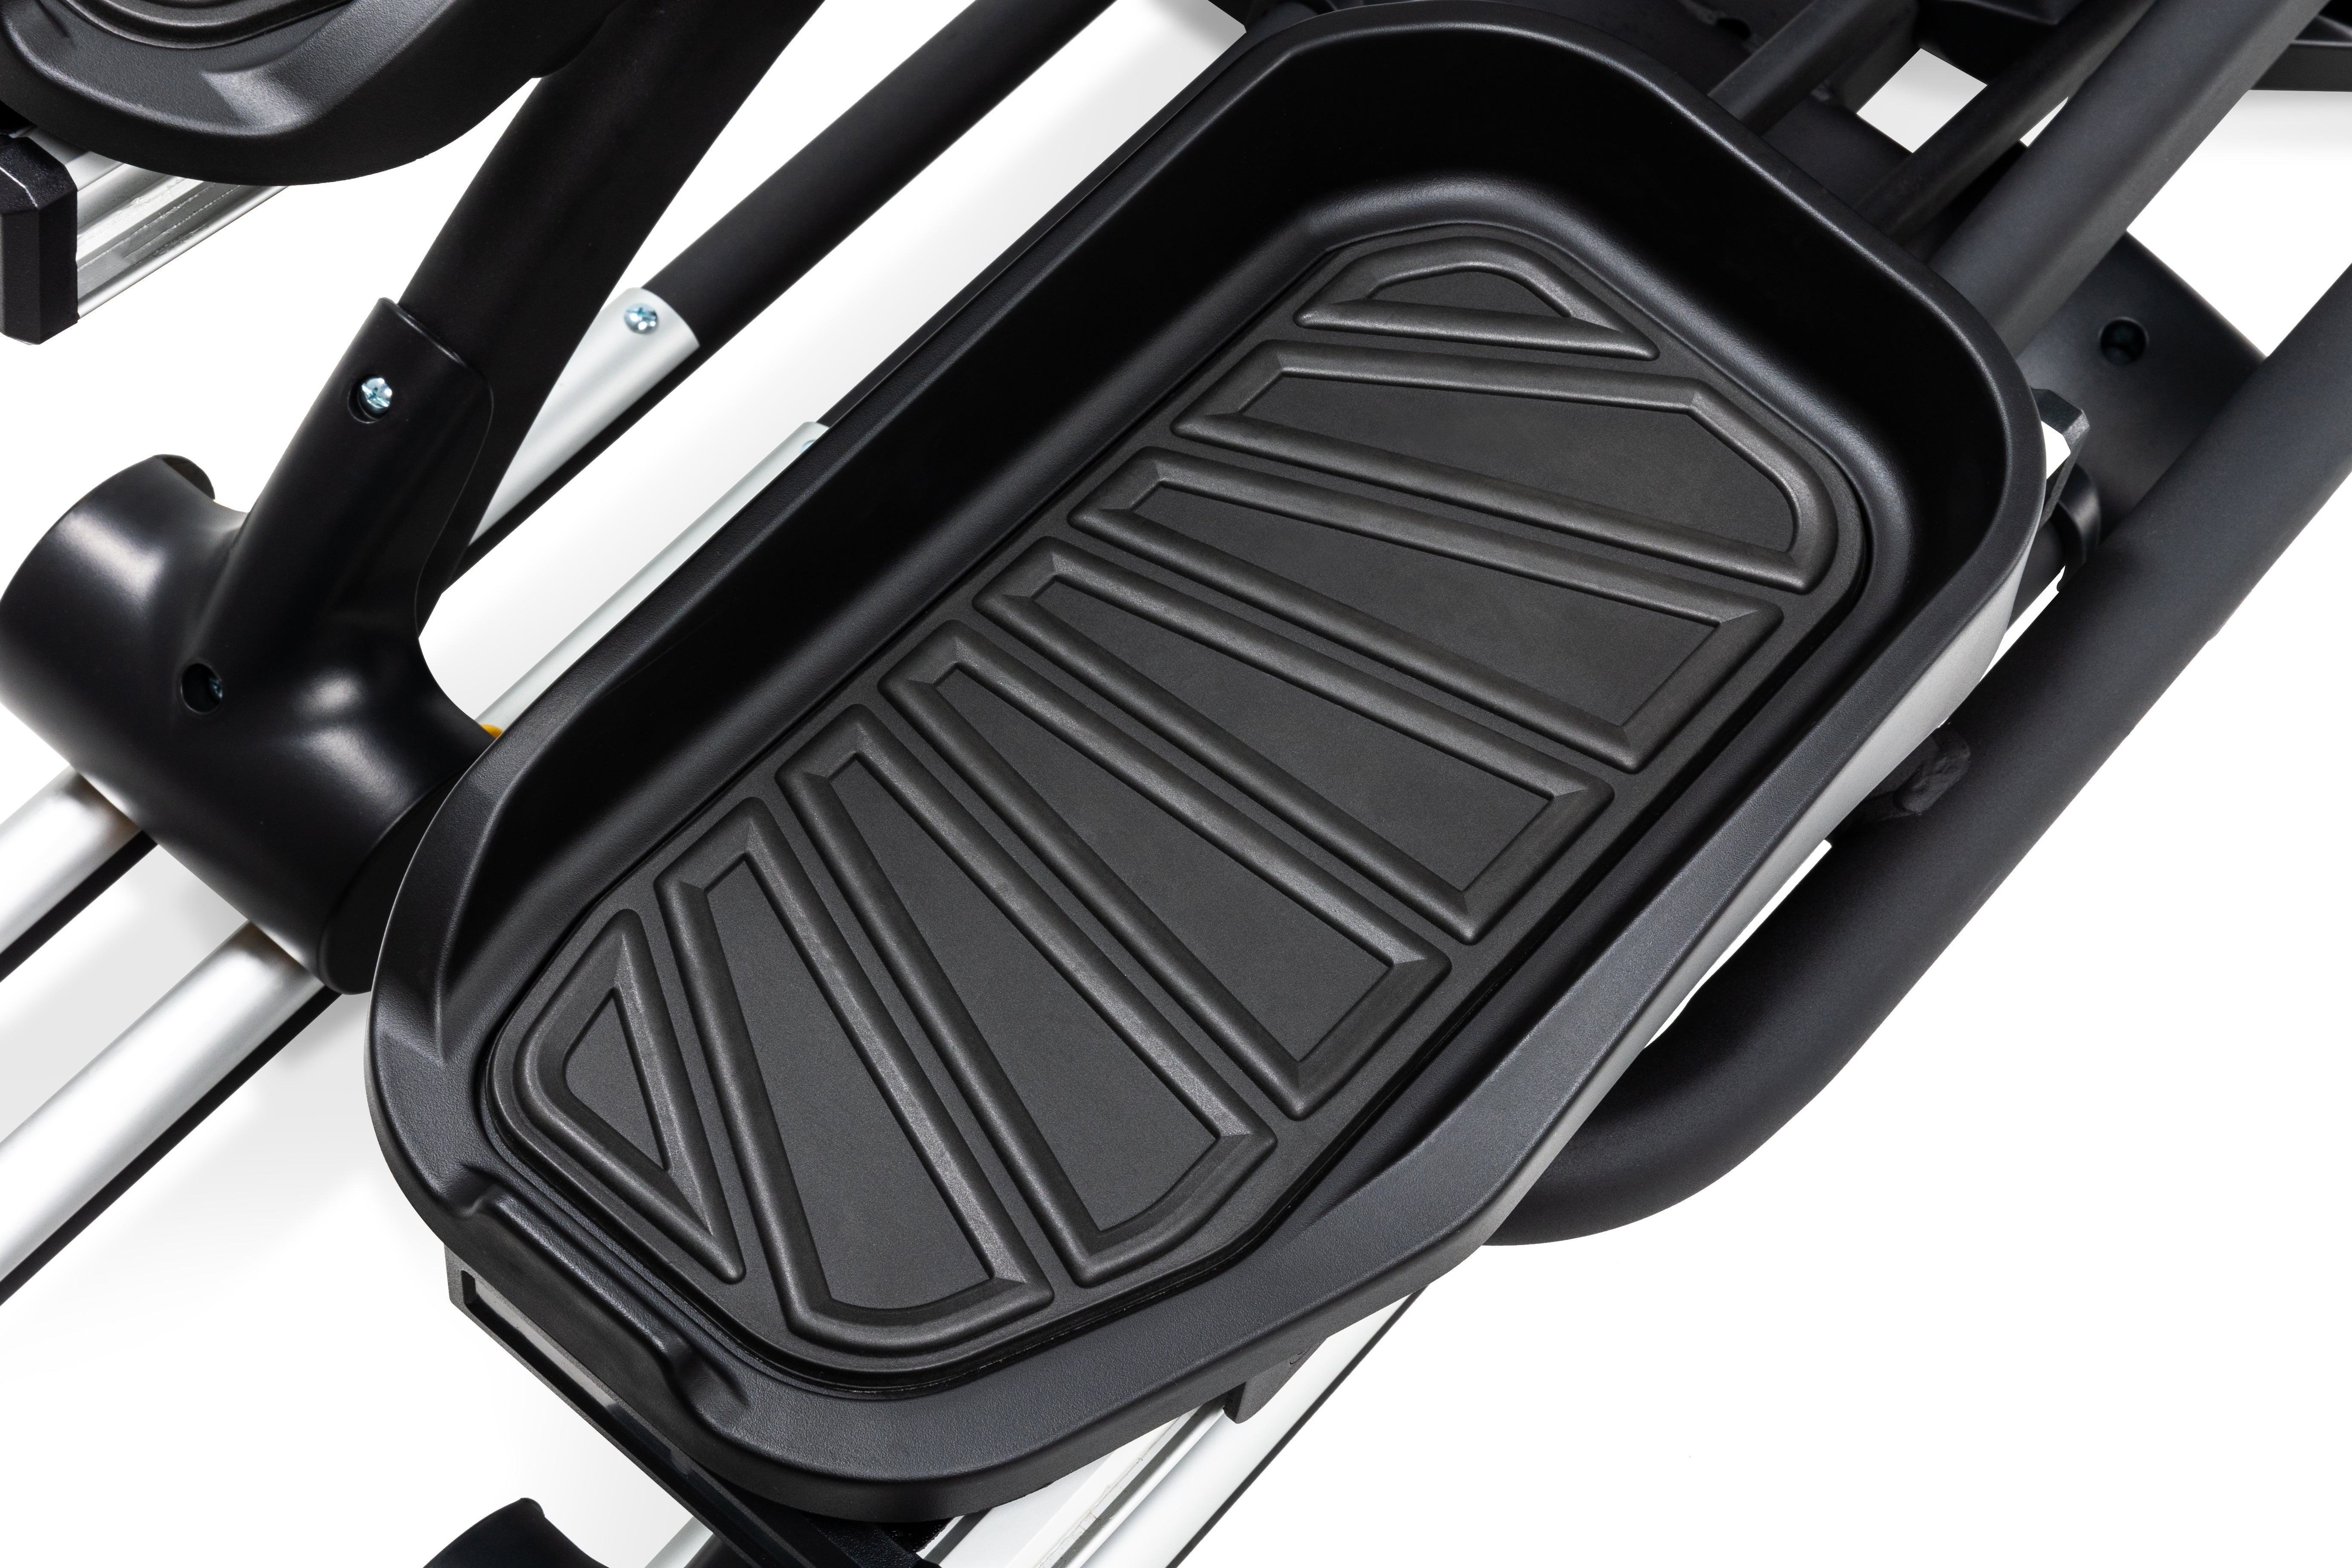 Angled view of the Sole E95S elliptical machine highlighting the textured foot pedal and surrounding frame components.